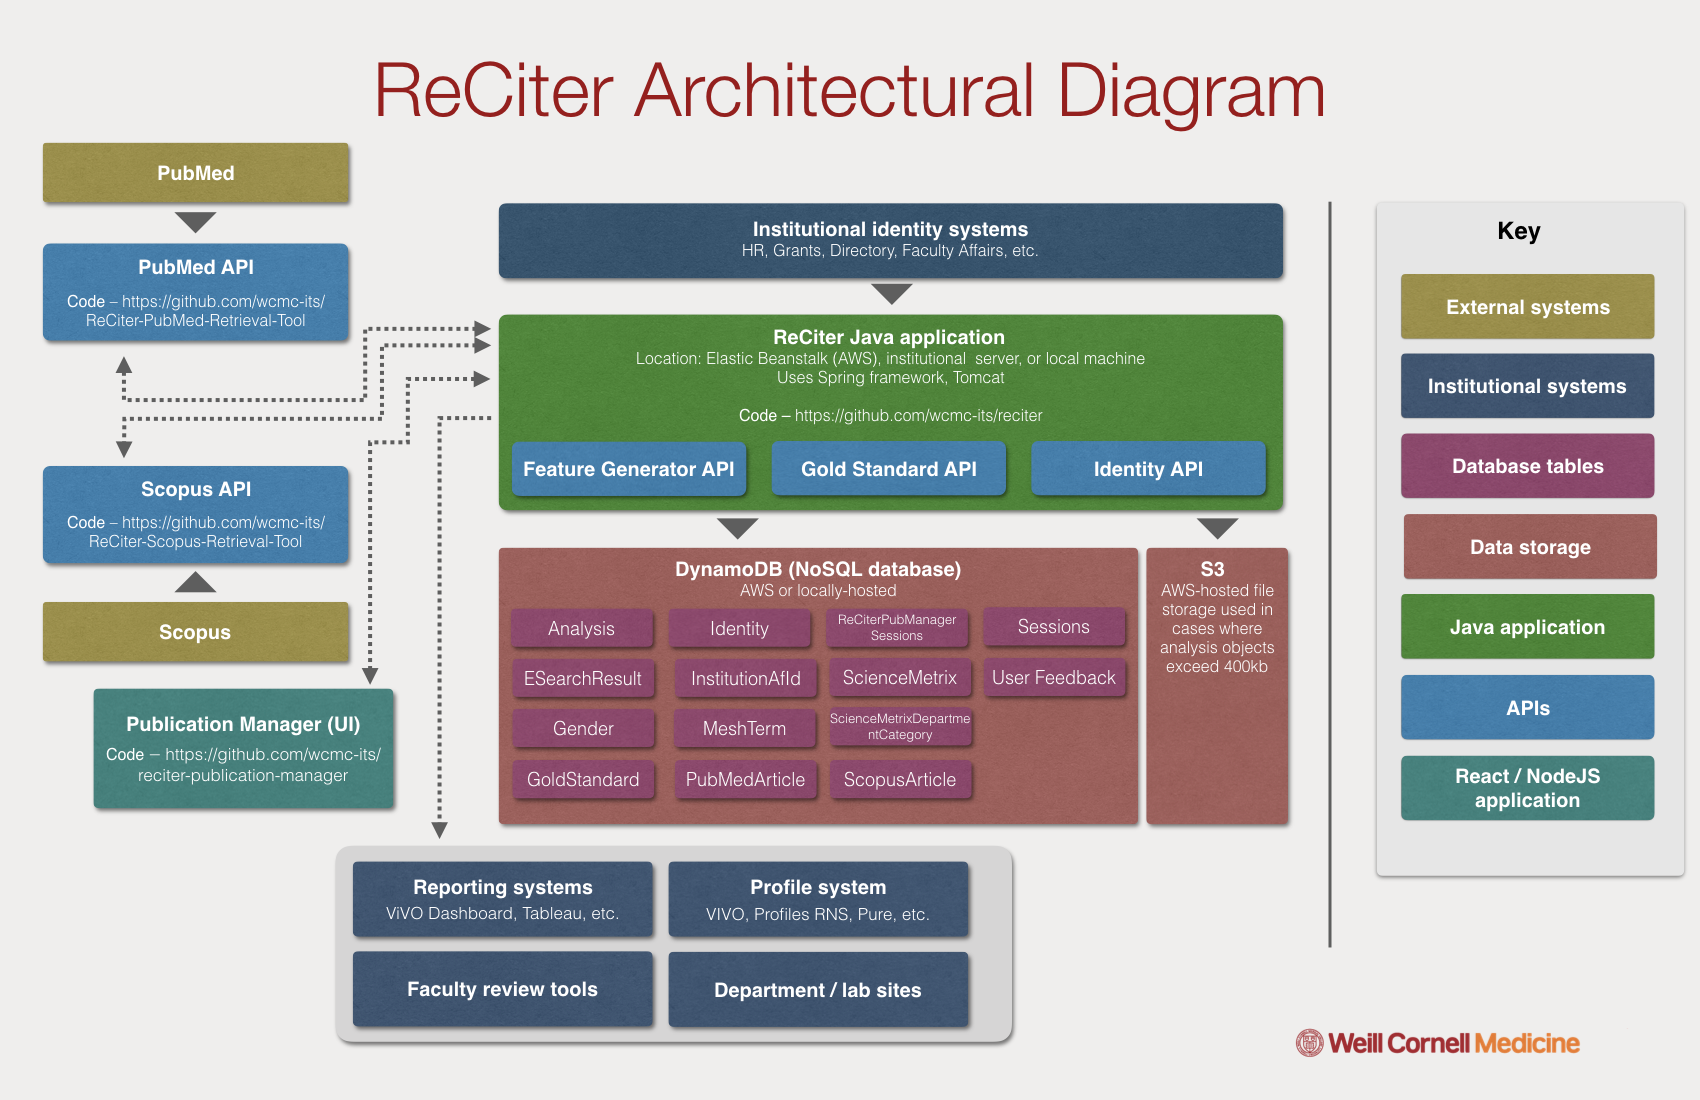 https://raw.githubusercontent.com/wcmc-its/ReCiter/master/files/ArchitecturalDiagram-NEW.png